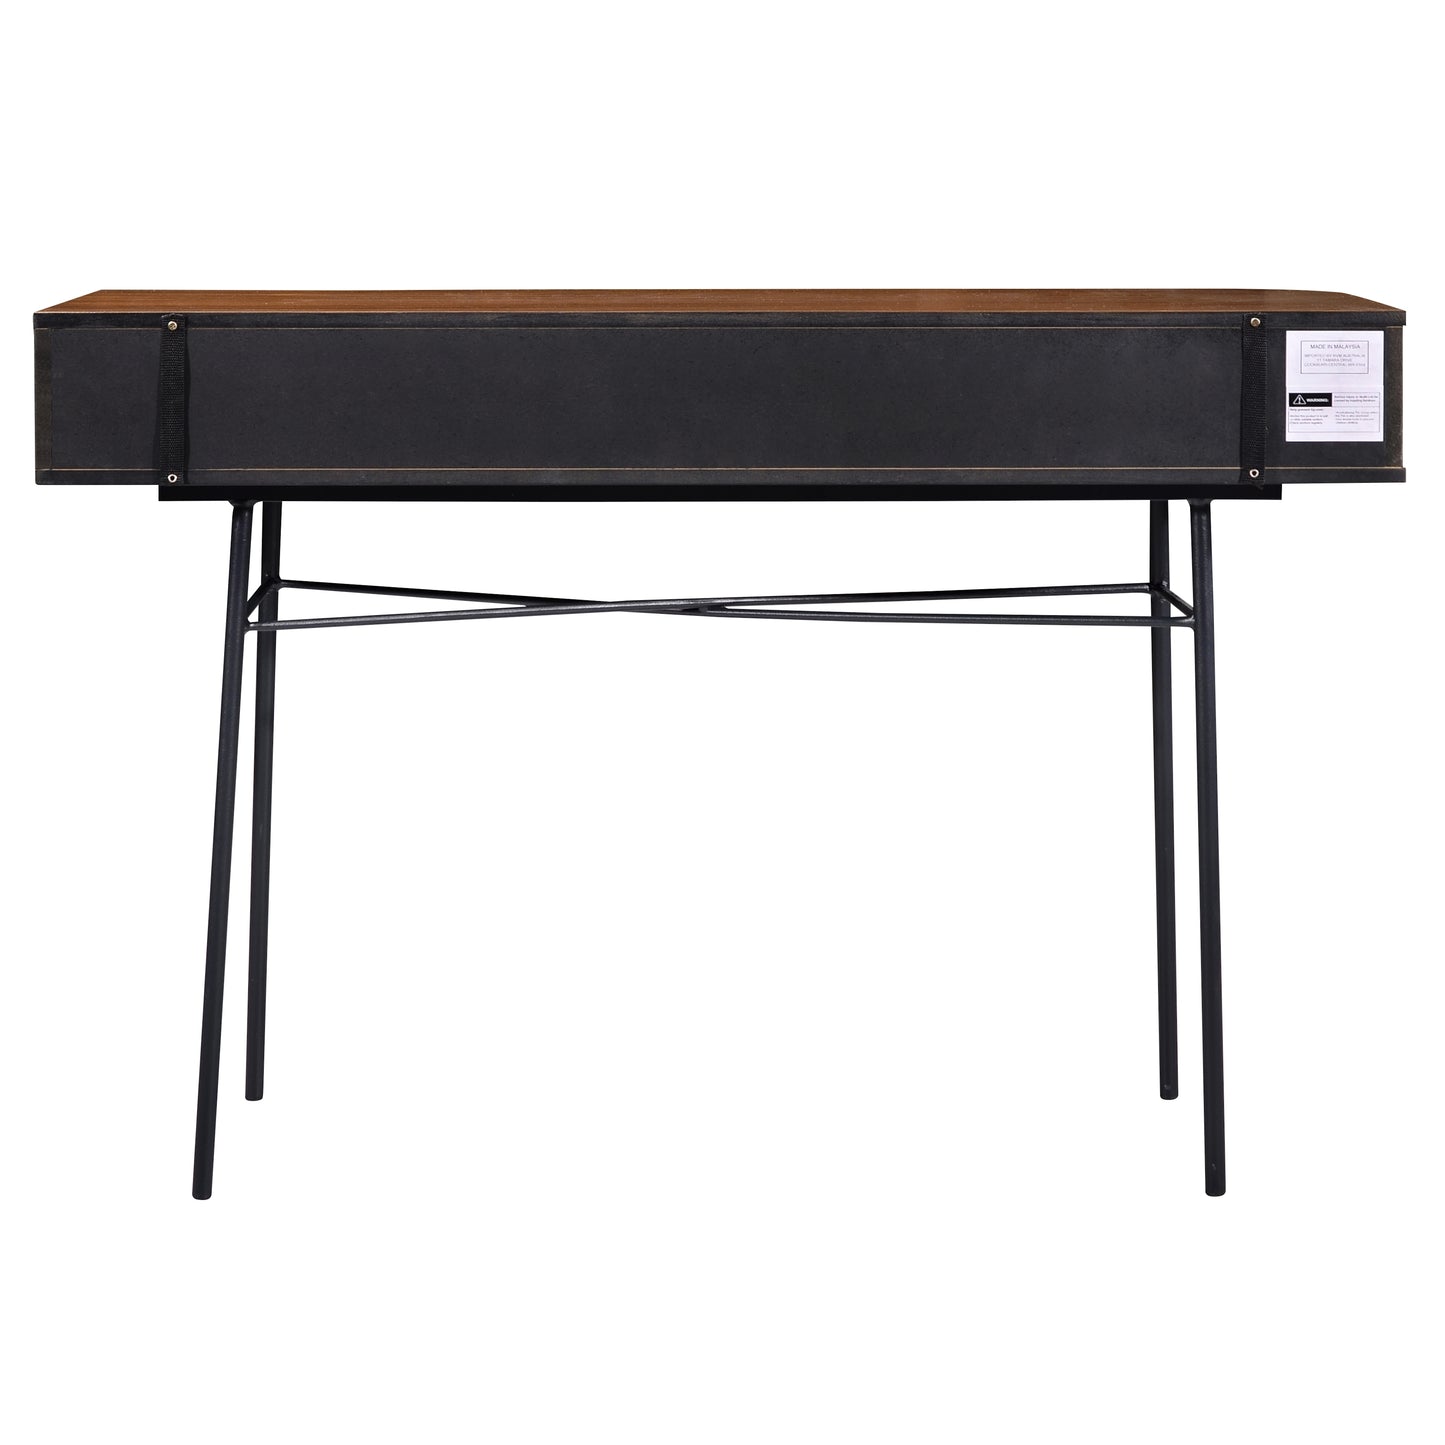 Criterion Albany Console Table 1200mm Semi-Assembled, Powder Coated Steel Legs Dark Ash